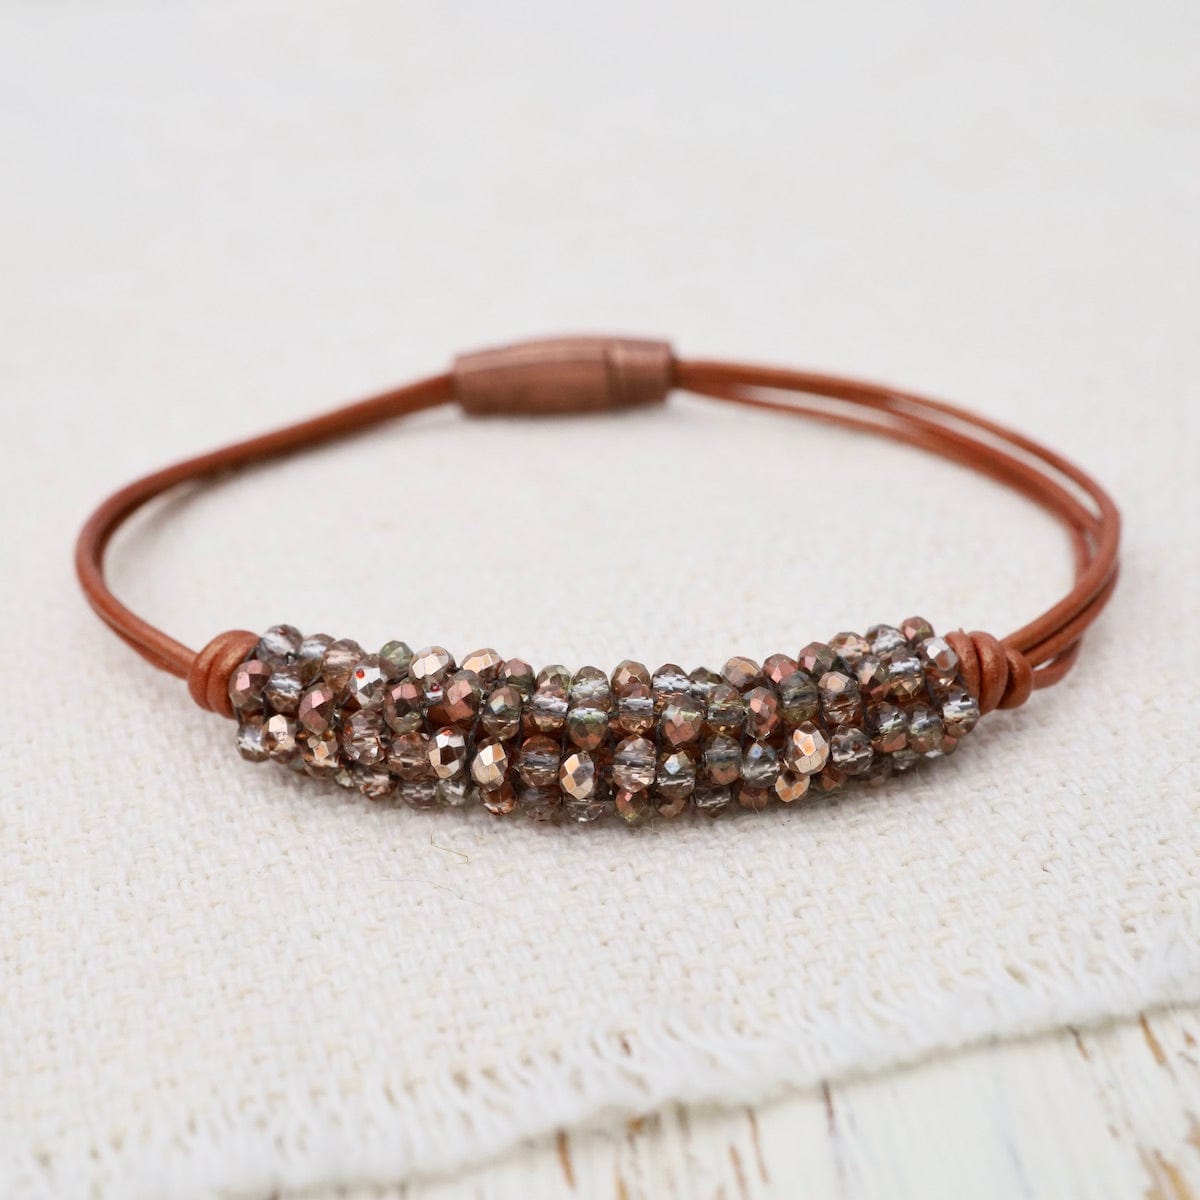 BRC-JM Hand Stitched Mixed Copper Crystals on Hand Tied Copper Leather Bracelet